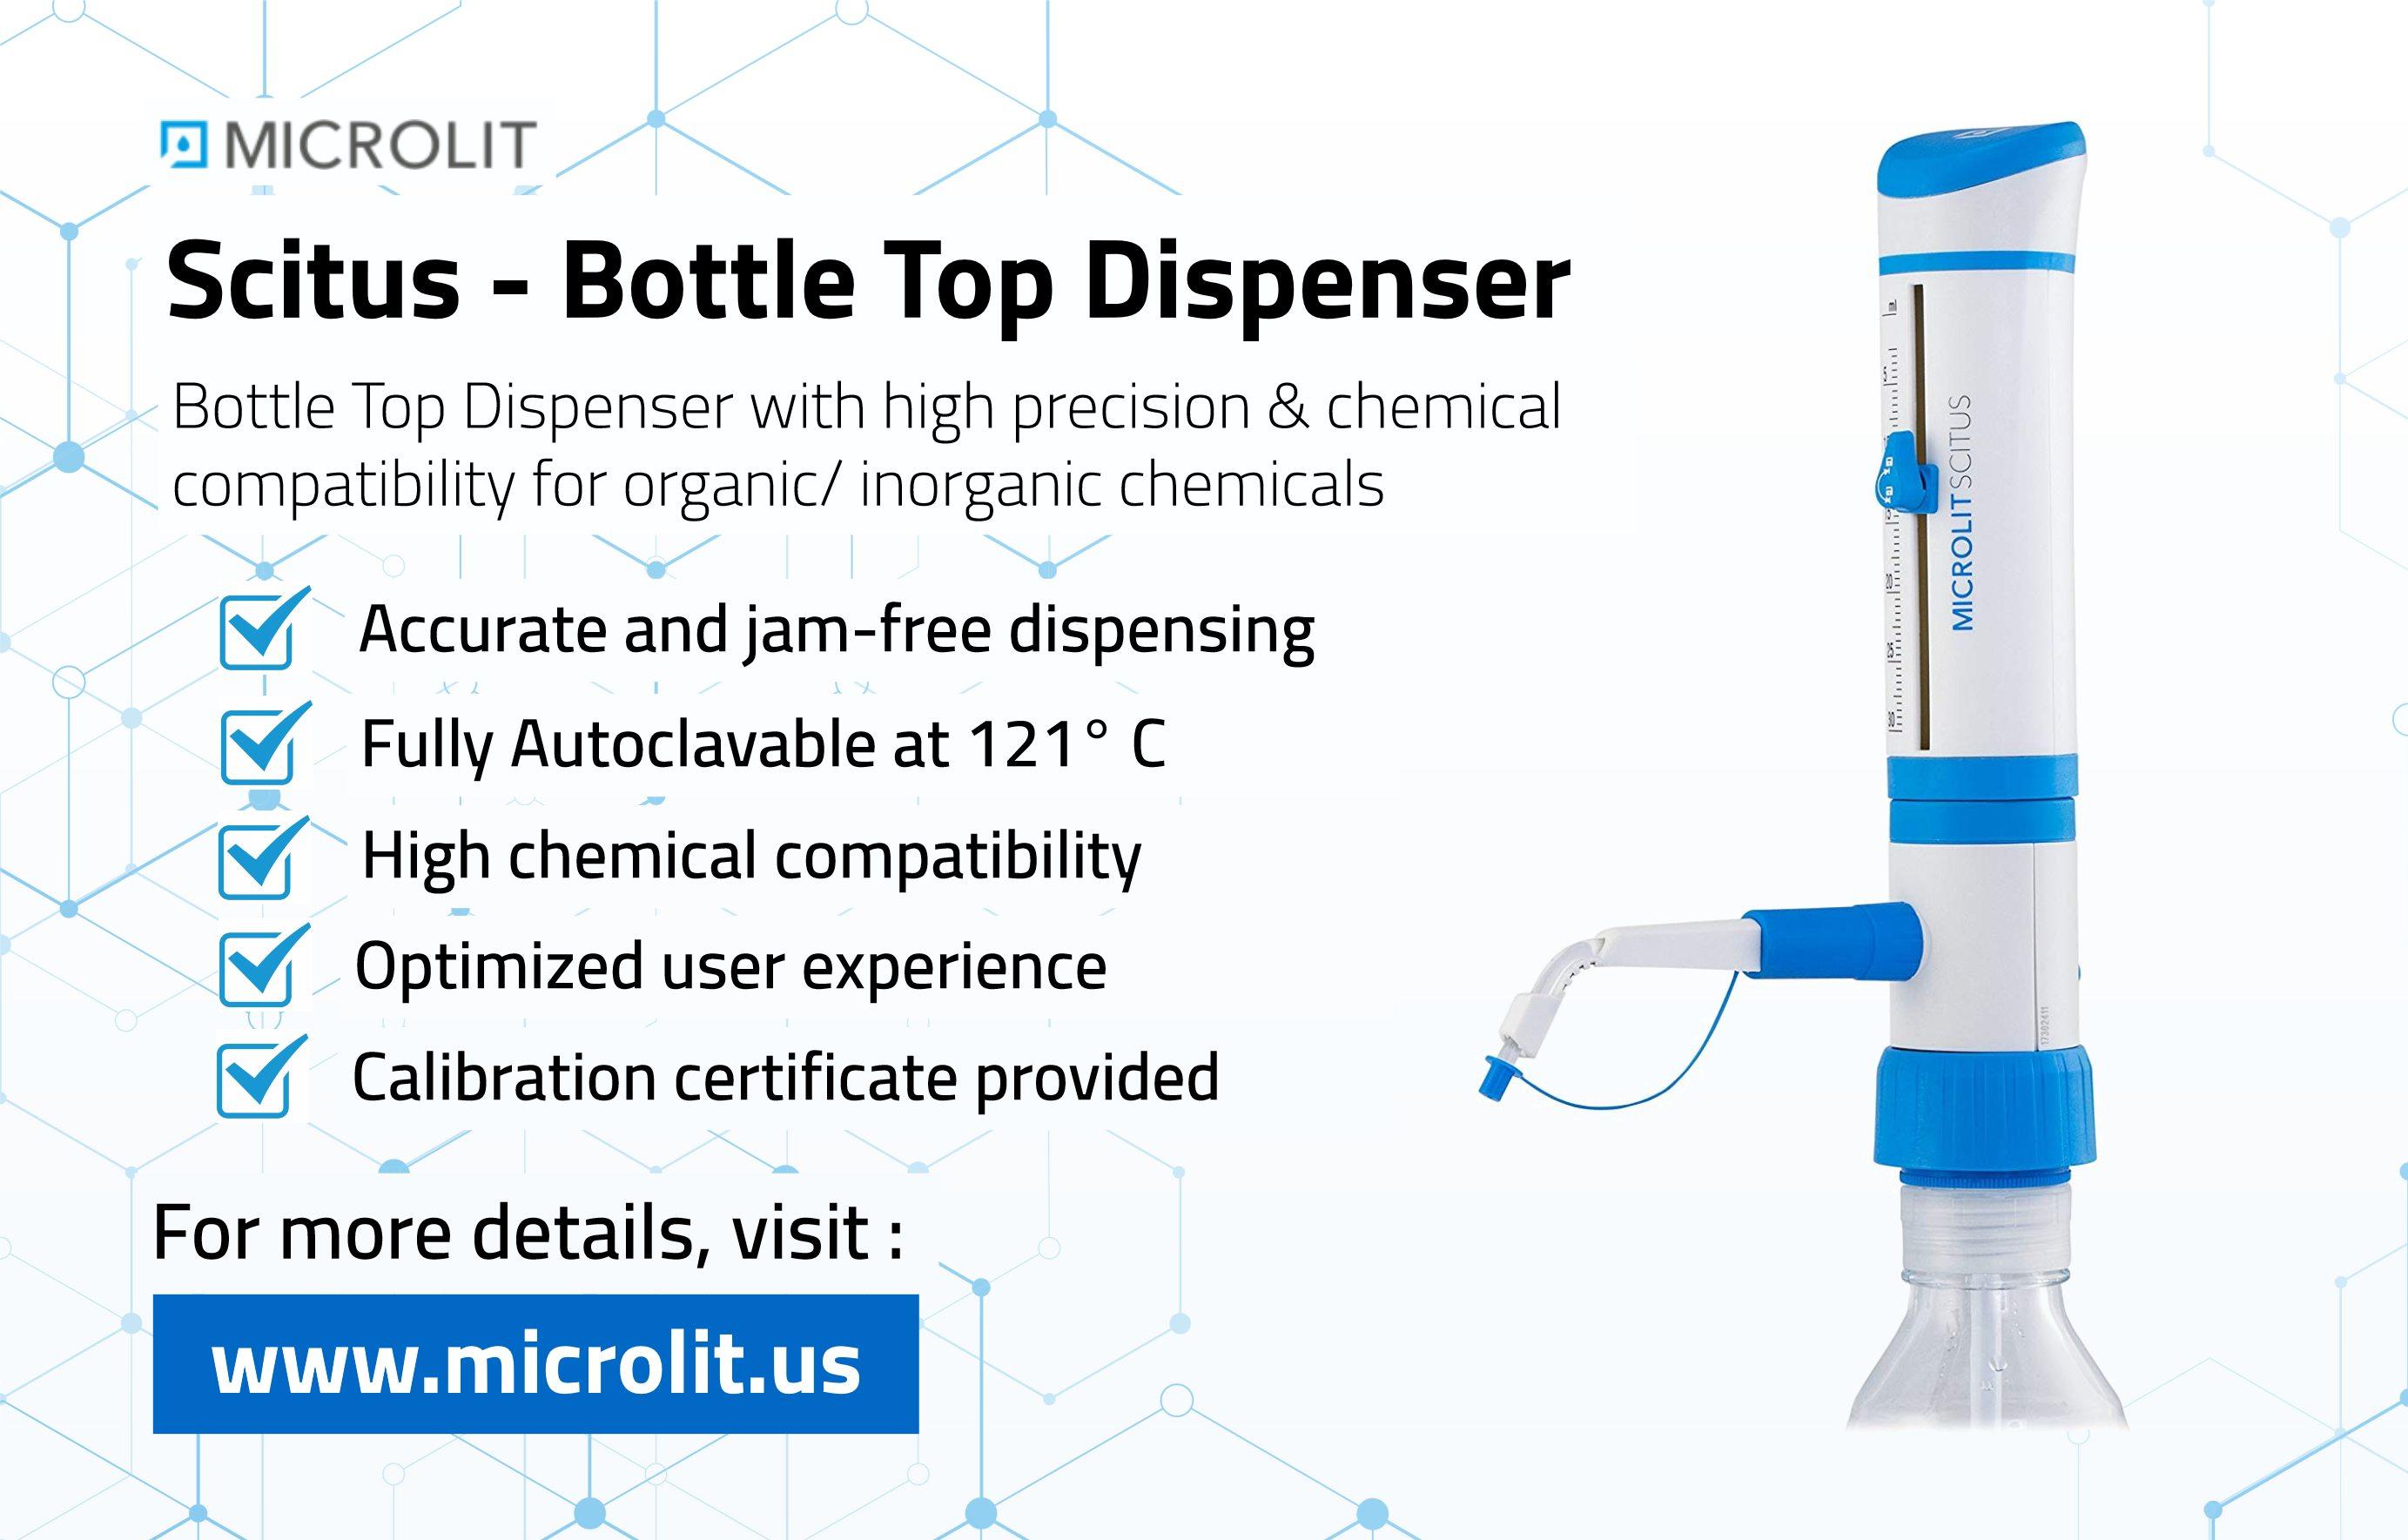 Image - Microlit offers the best #BottleTopDispenser with high precision and chemical compatibility for organic or in...